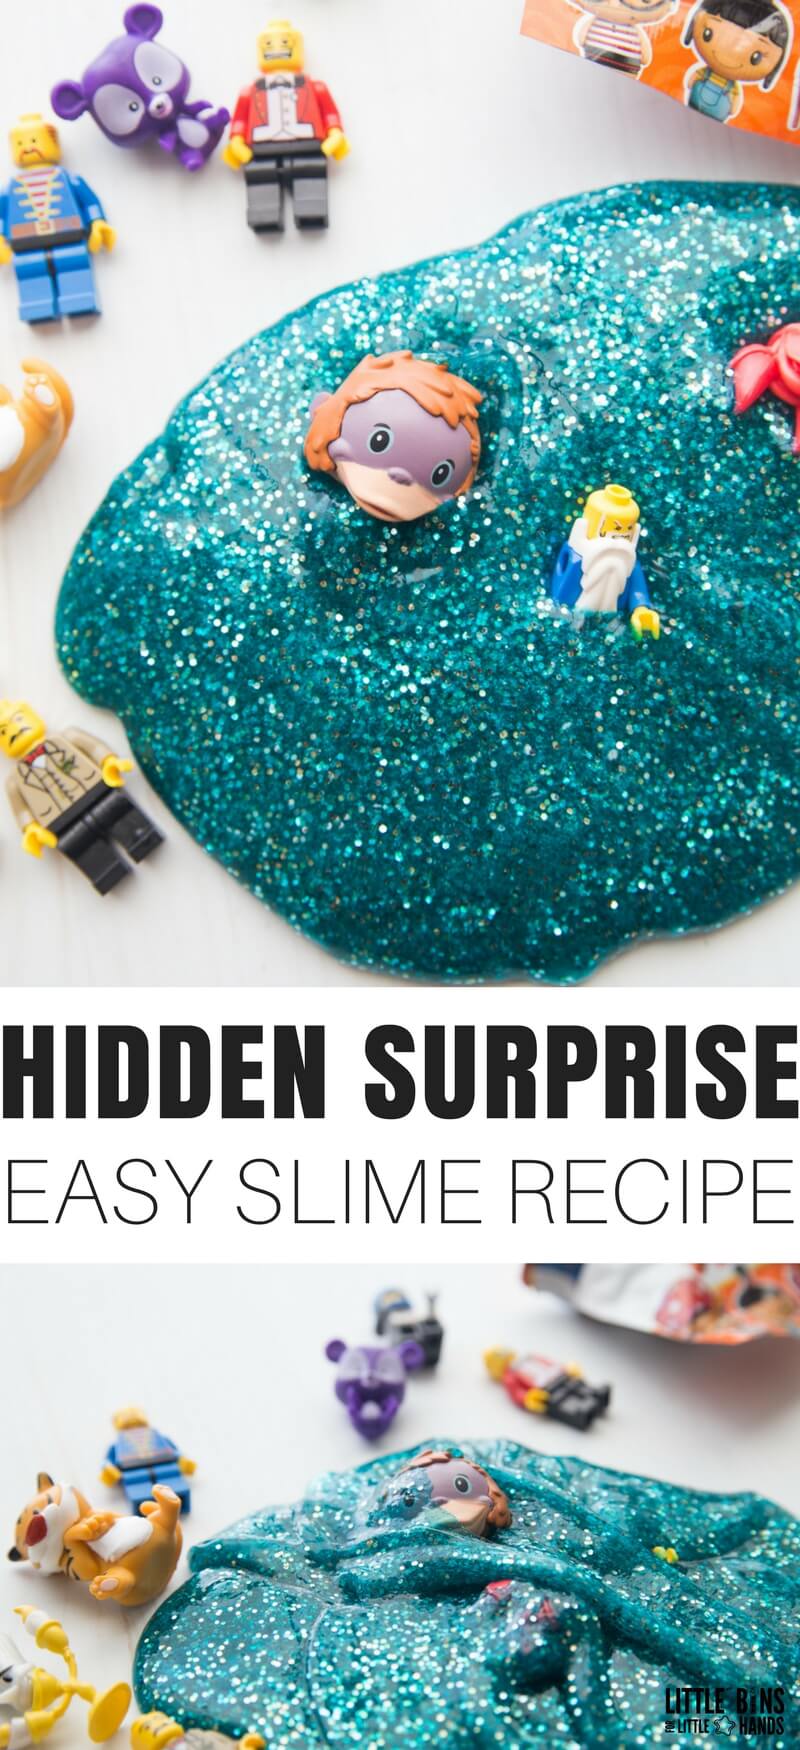 Make an easy slime recipe with a hidden surprise inside. Our basic slime recipes are quick and easy. Learn how to make slime in a snap. We show you how to master slime with basic slime recipes everyone wants to learn how to make!